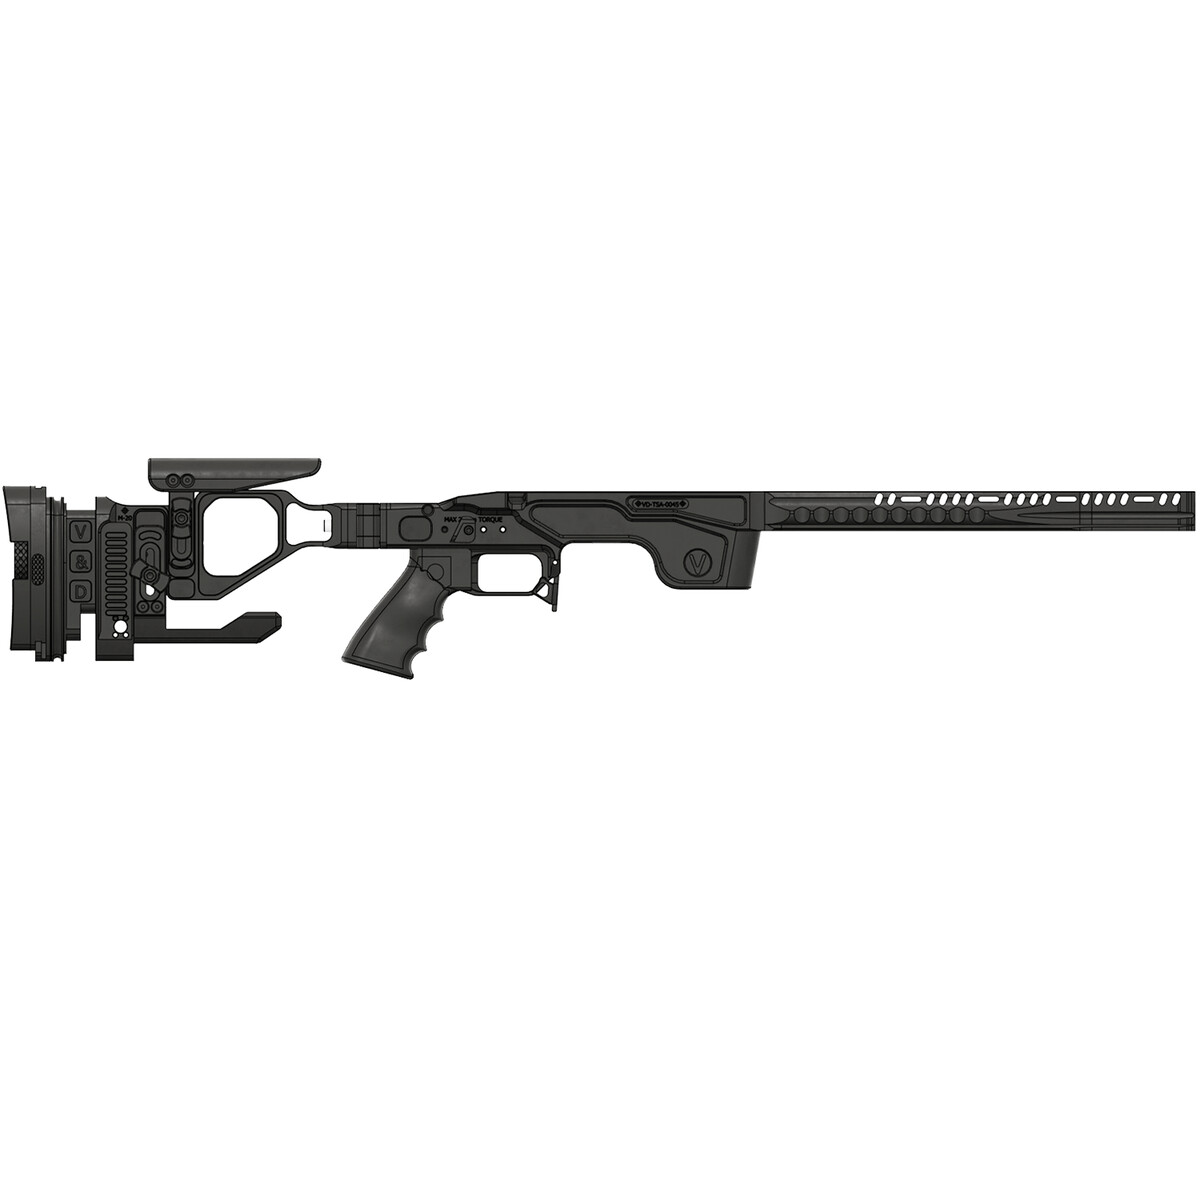 Vision & Design Chassis for Tikka T3 CTR with Open Top Frontguard